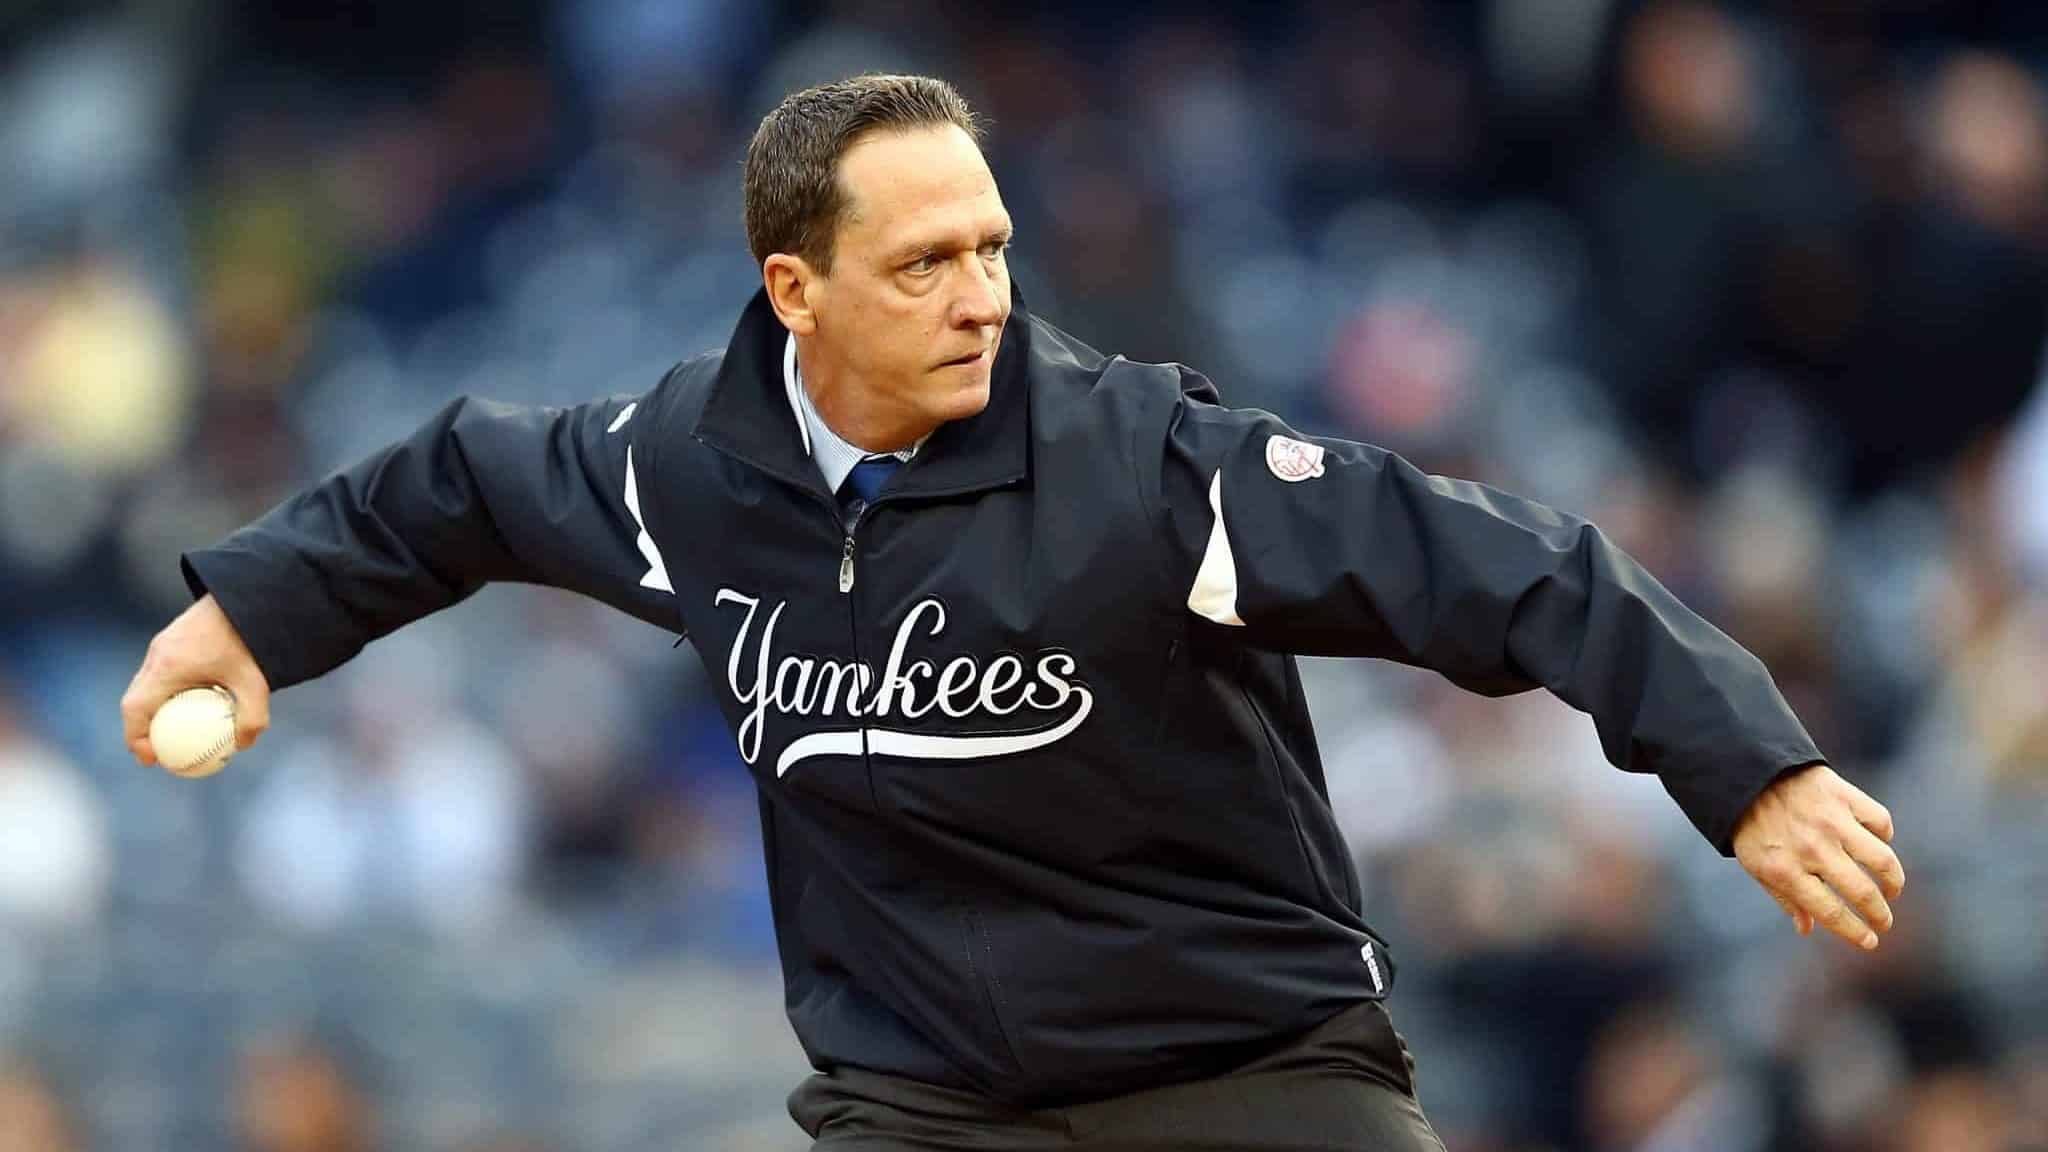 NEW YORK, NY - OCTOBER 12: Former New York Yankees David Cone throws out the first pitch prior to Game Five of the American League Division Series against the Baltimore Orioles at Yankee Stadium on October 12, 2012 in New York, New York.